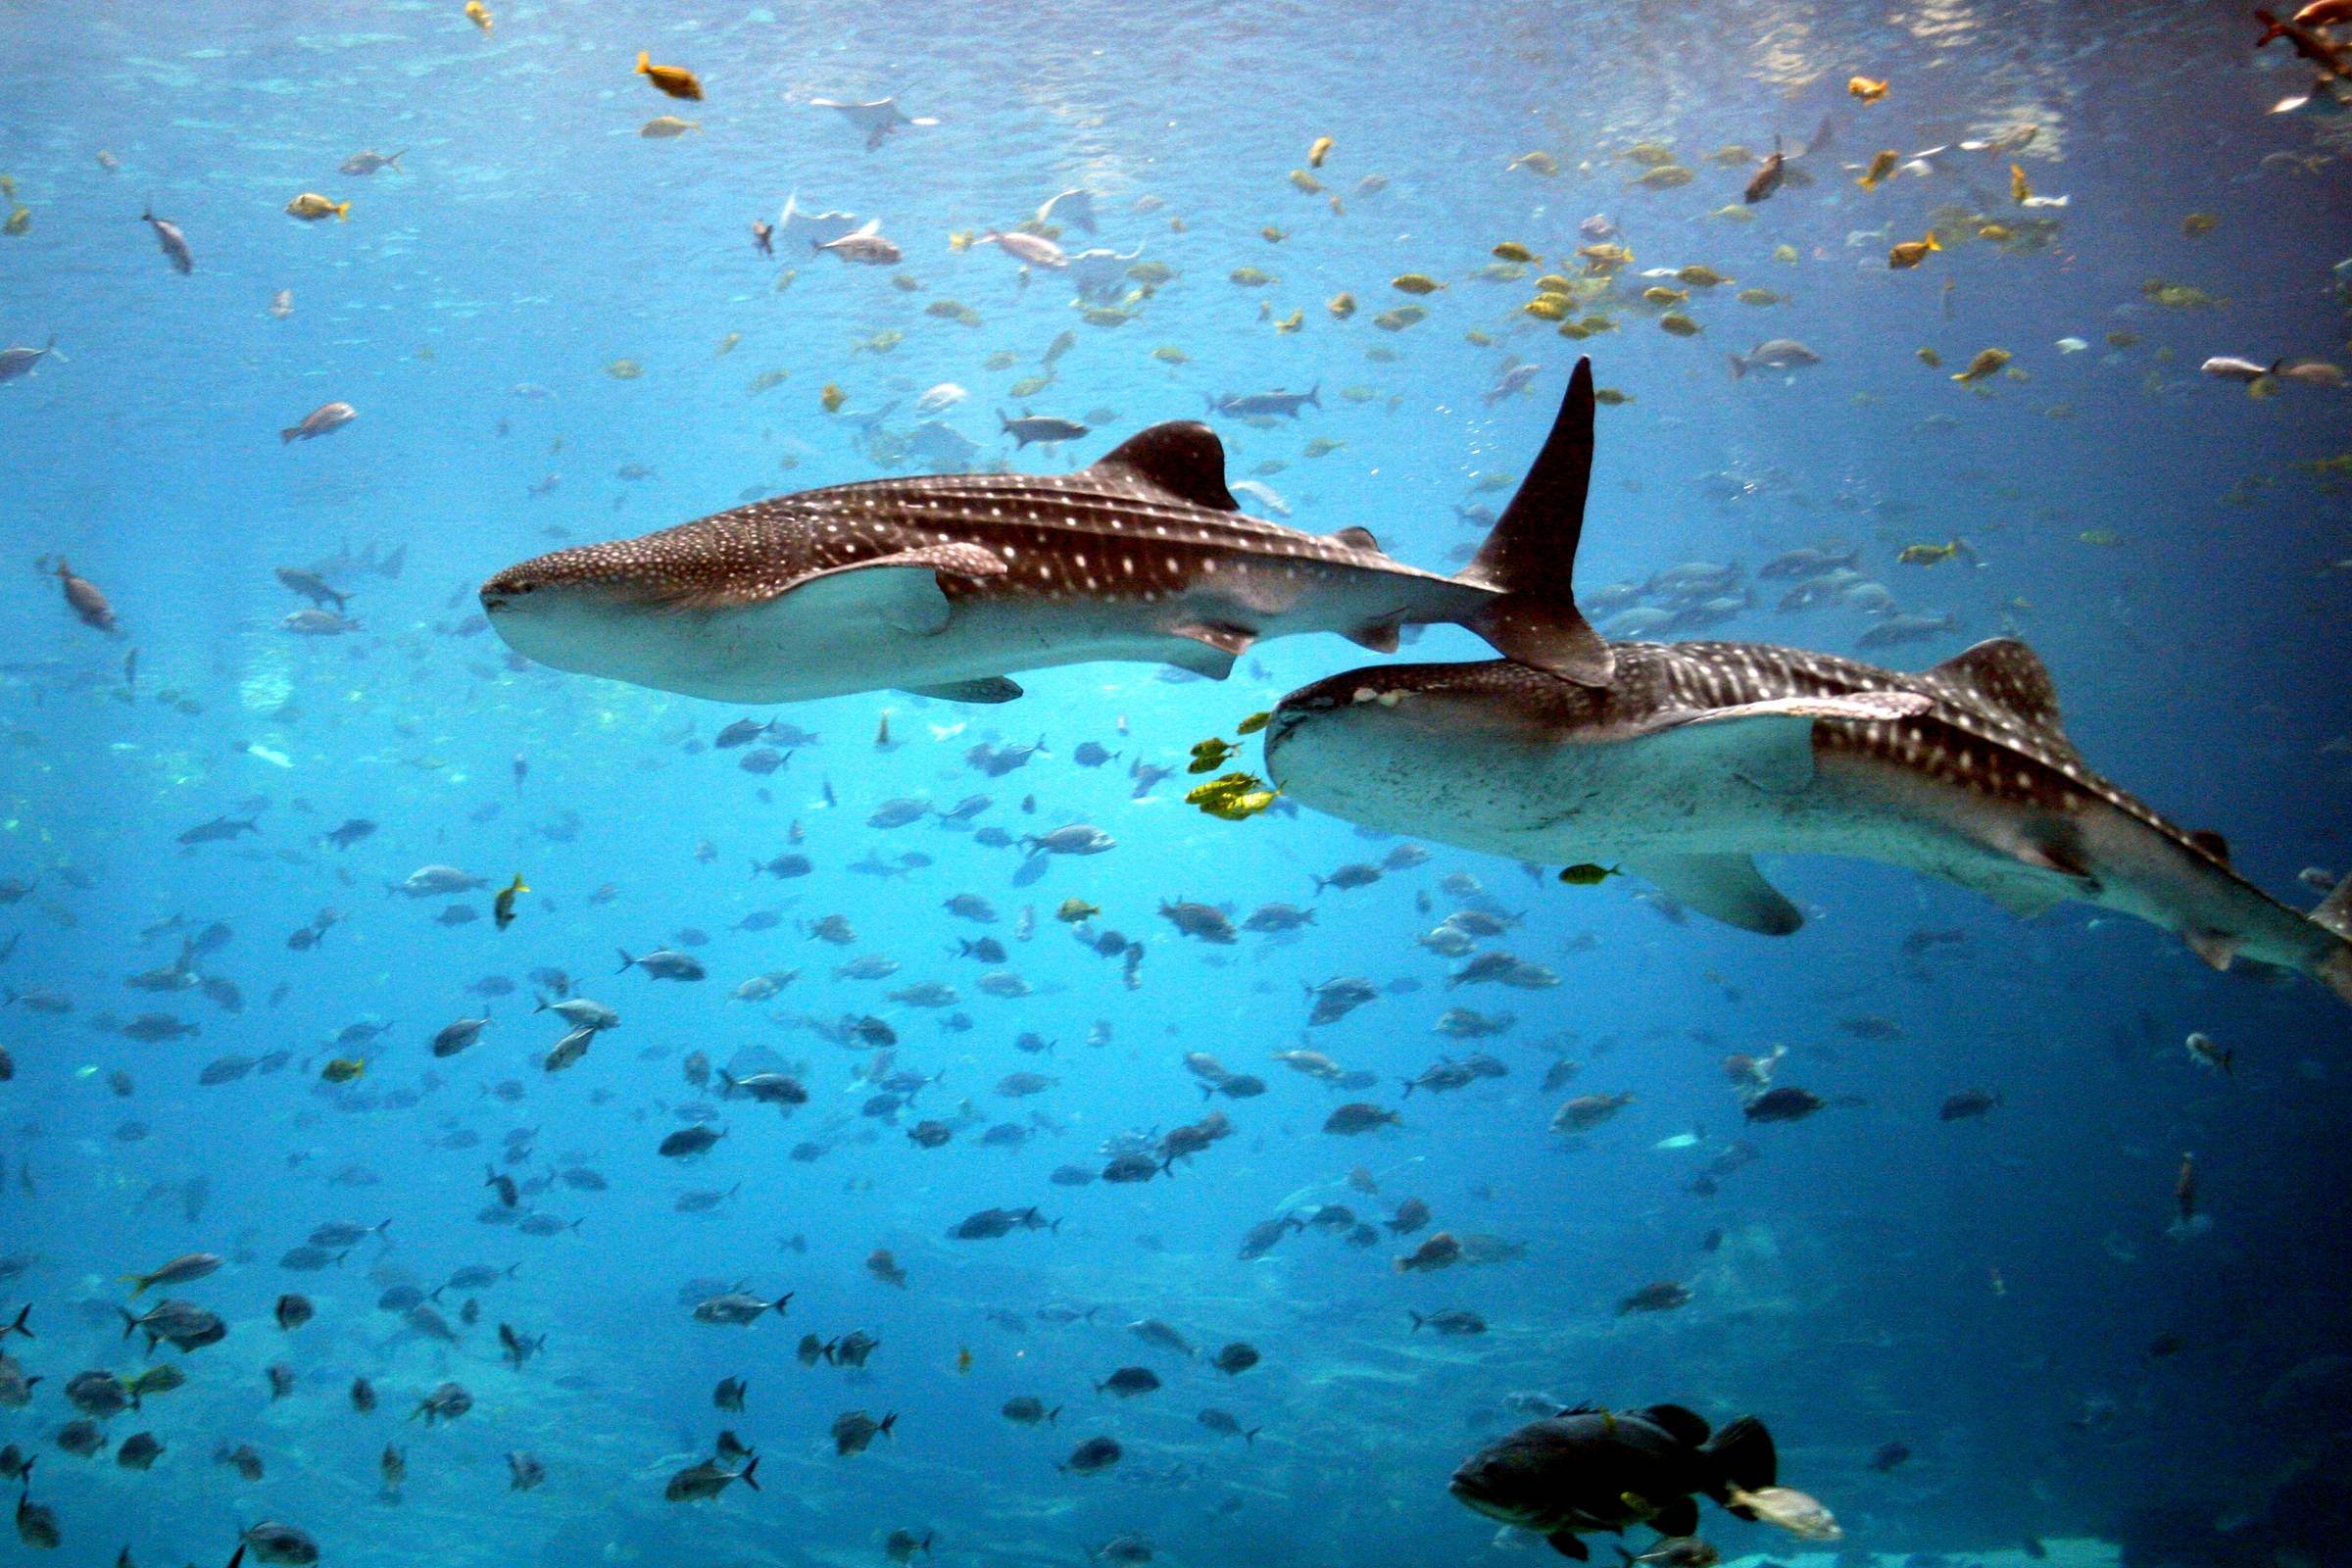 Download Cool Animals Animal Whale Shark Wallpaper 2400x1600. HD